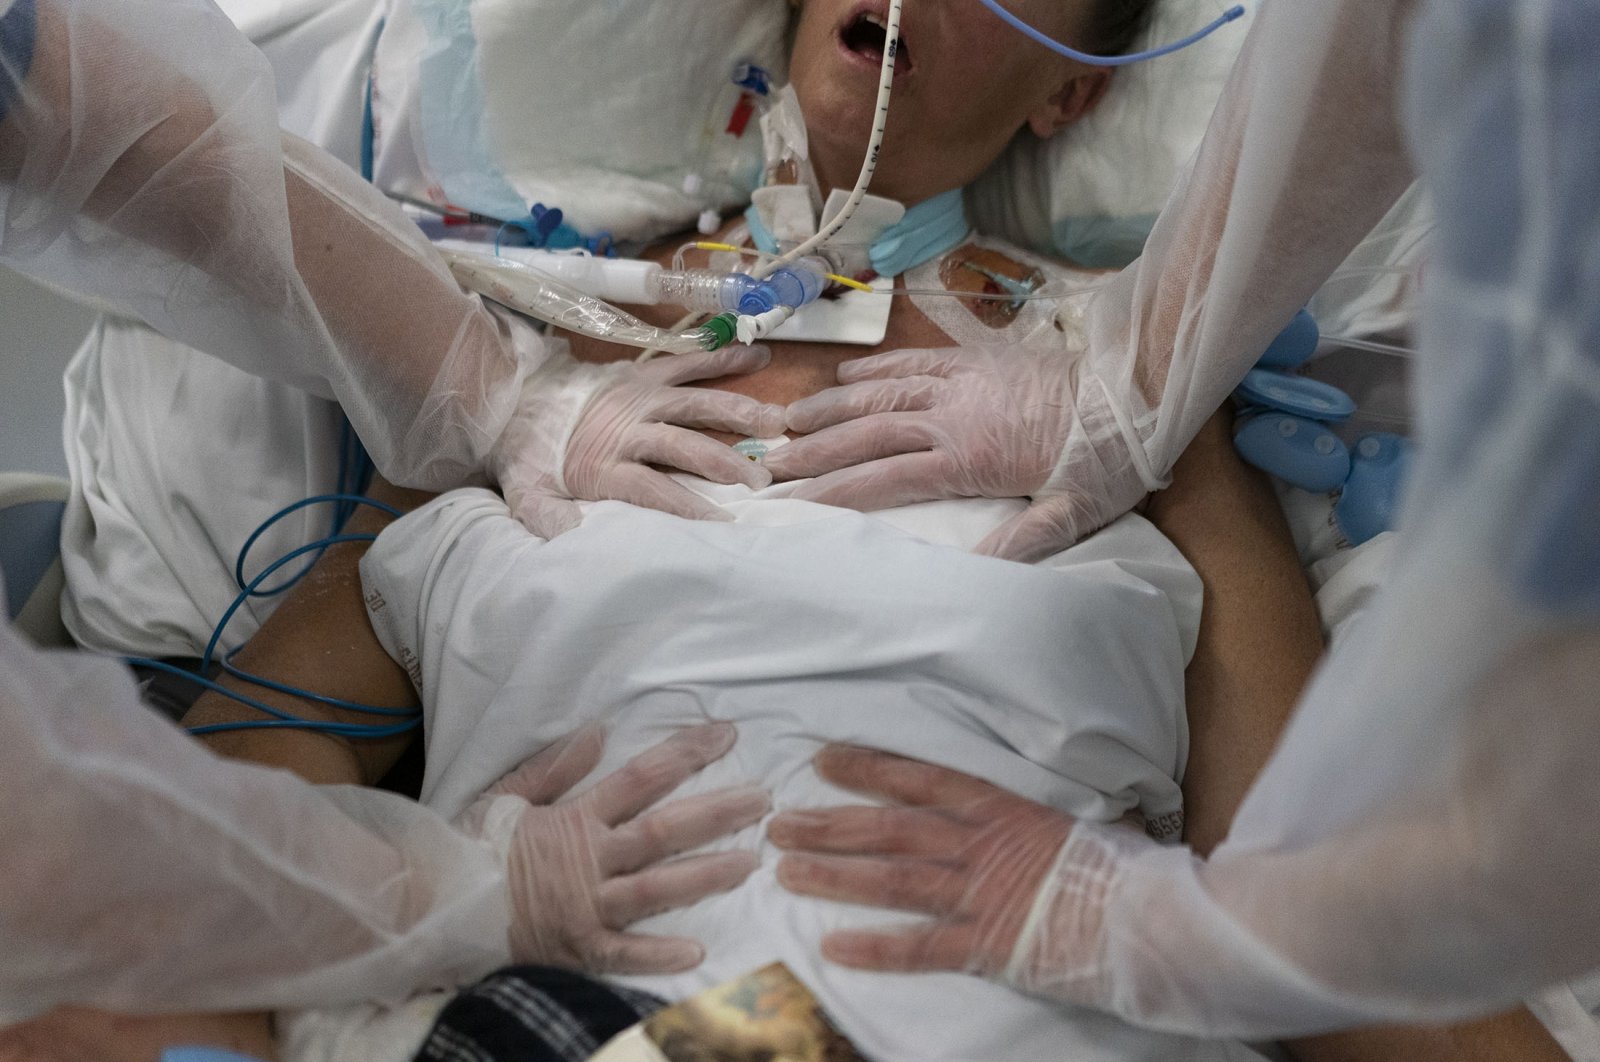 Nurses perform timed breathing exercises on a COVID-19 patient on a ventilator in the COVID-19 intensive care unit at the la Timone hospital in Marseille, southern France, Dec. 31, 2021. (AP Photo)